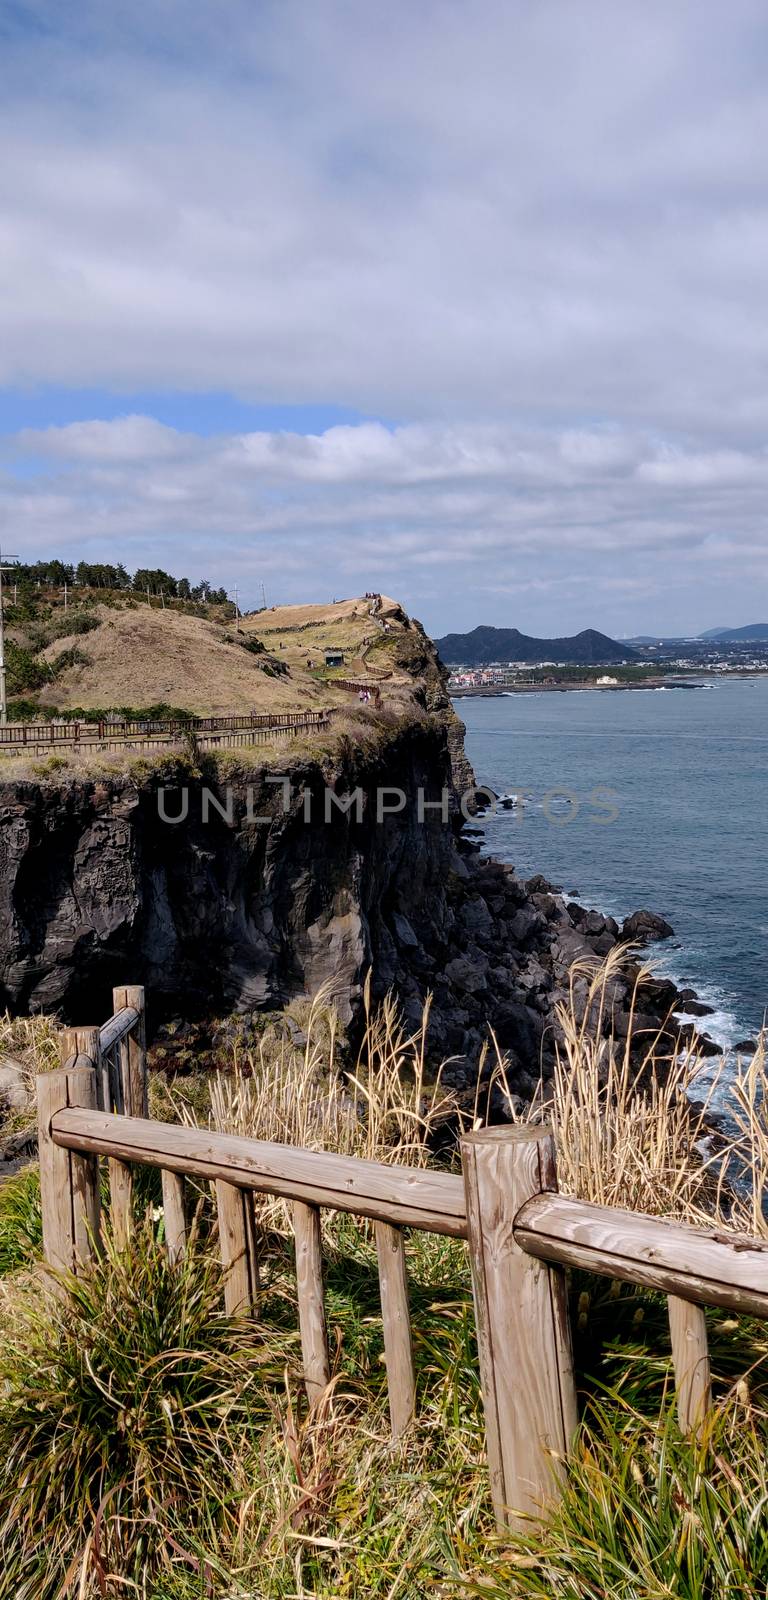 Vertical shot of songaksan, jeju Island, South Korea with ocean in the background